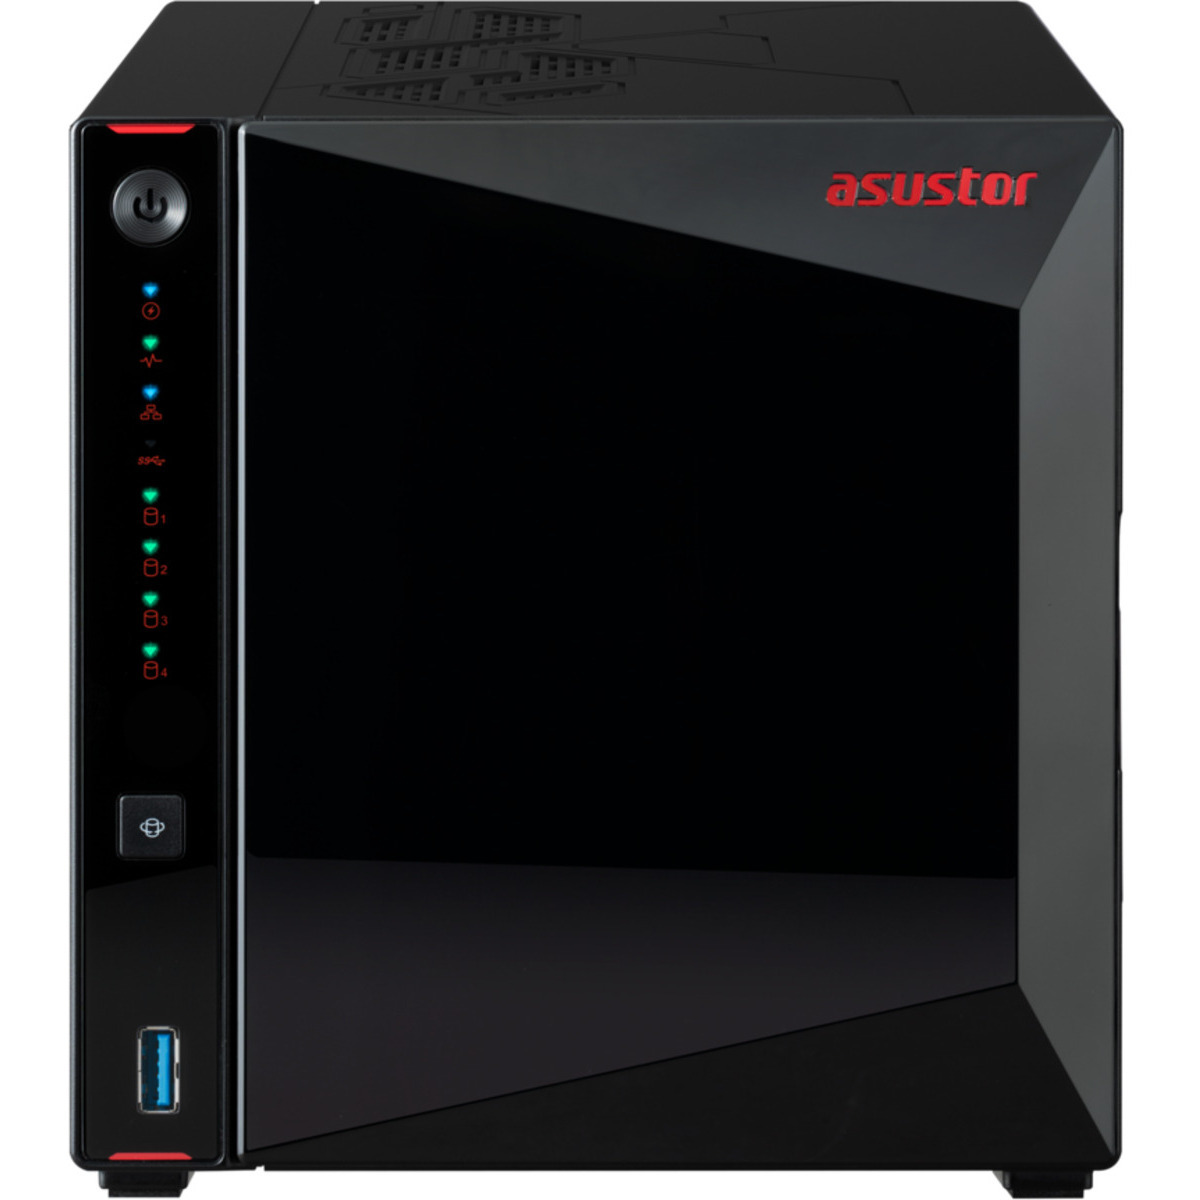 ASUSTOR Nimbustor 4 Gen2 AS5404T 80tb 4-Bay Desktop Multimedia / Power User / Business NAS - Network Attached Storage Device 4x20tb Seagate EXOS X20 ST20000NM007D 3.5 7200rpm SATA 6Gb/s HDD ENTERPRISE Class Drives Installed - Burn-In Tested - FREE RAM UPGRADE Nimbustor 4 Gen2 AS5404T